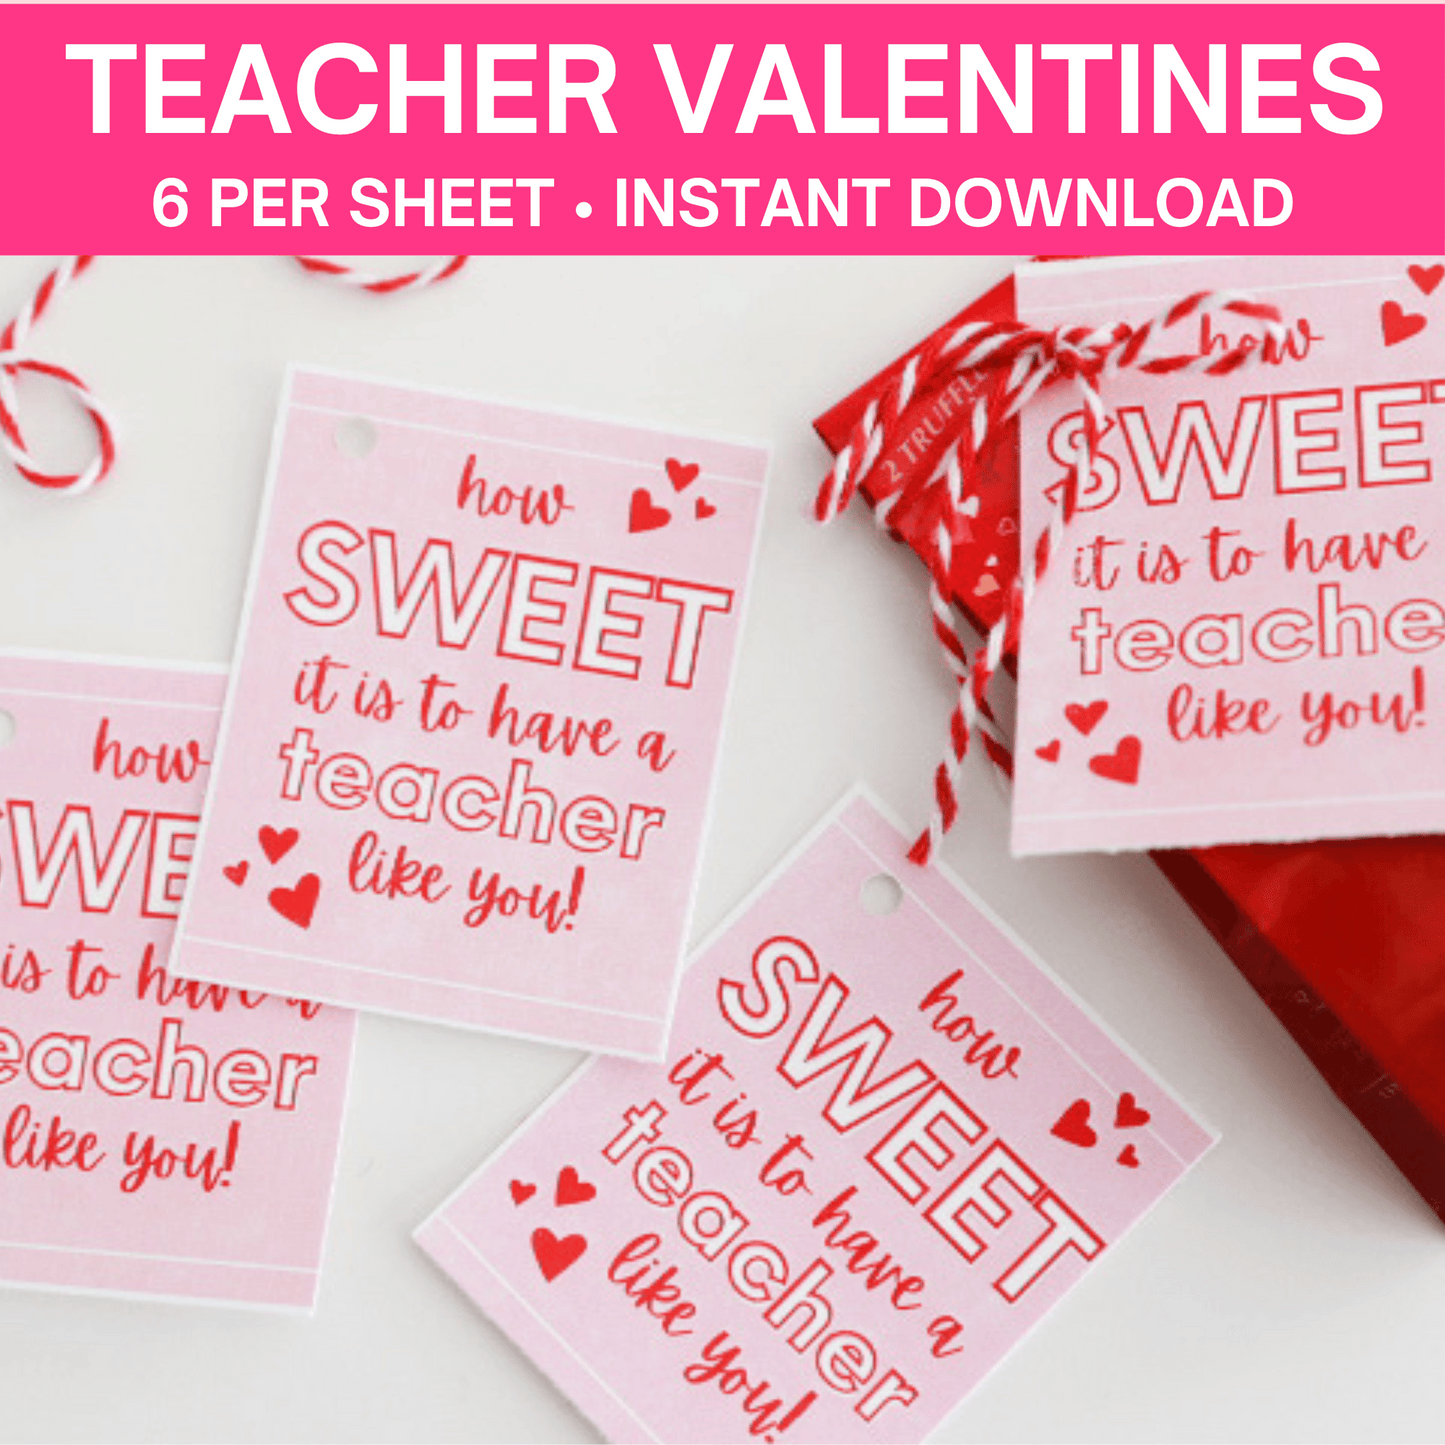 How Sweet It Is- Teacher Valentines Tags